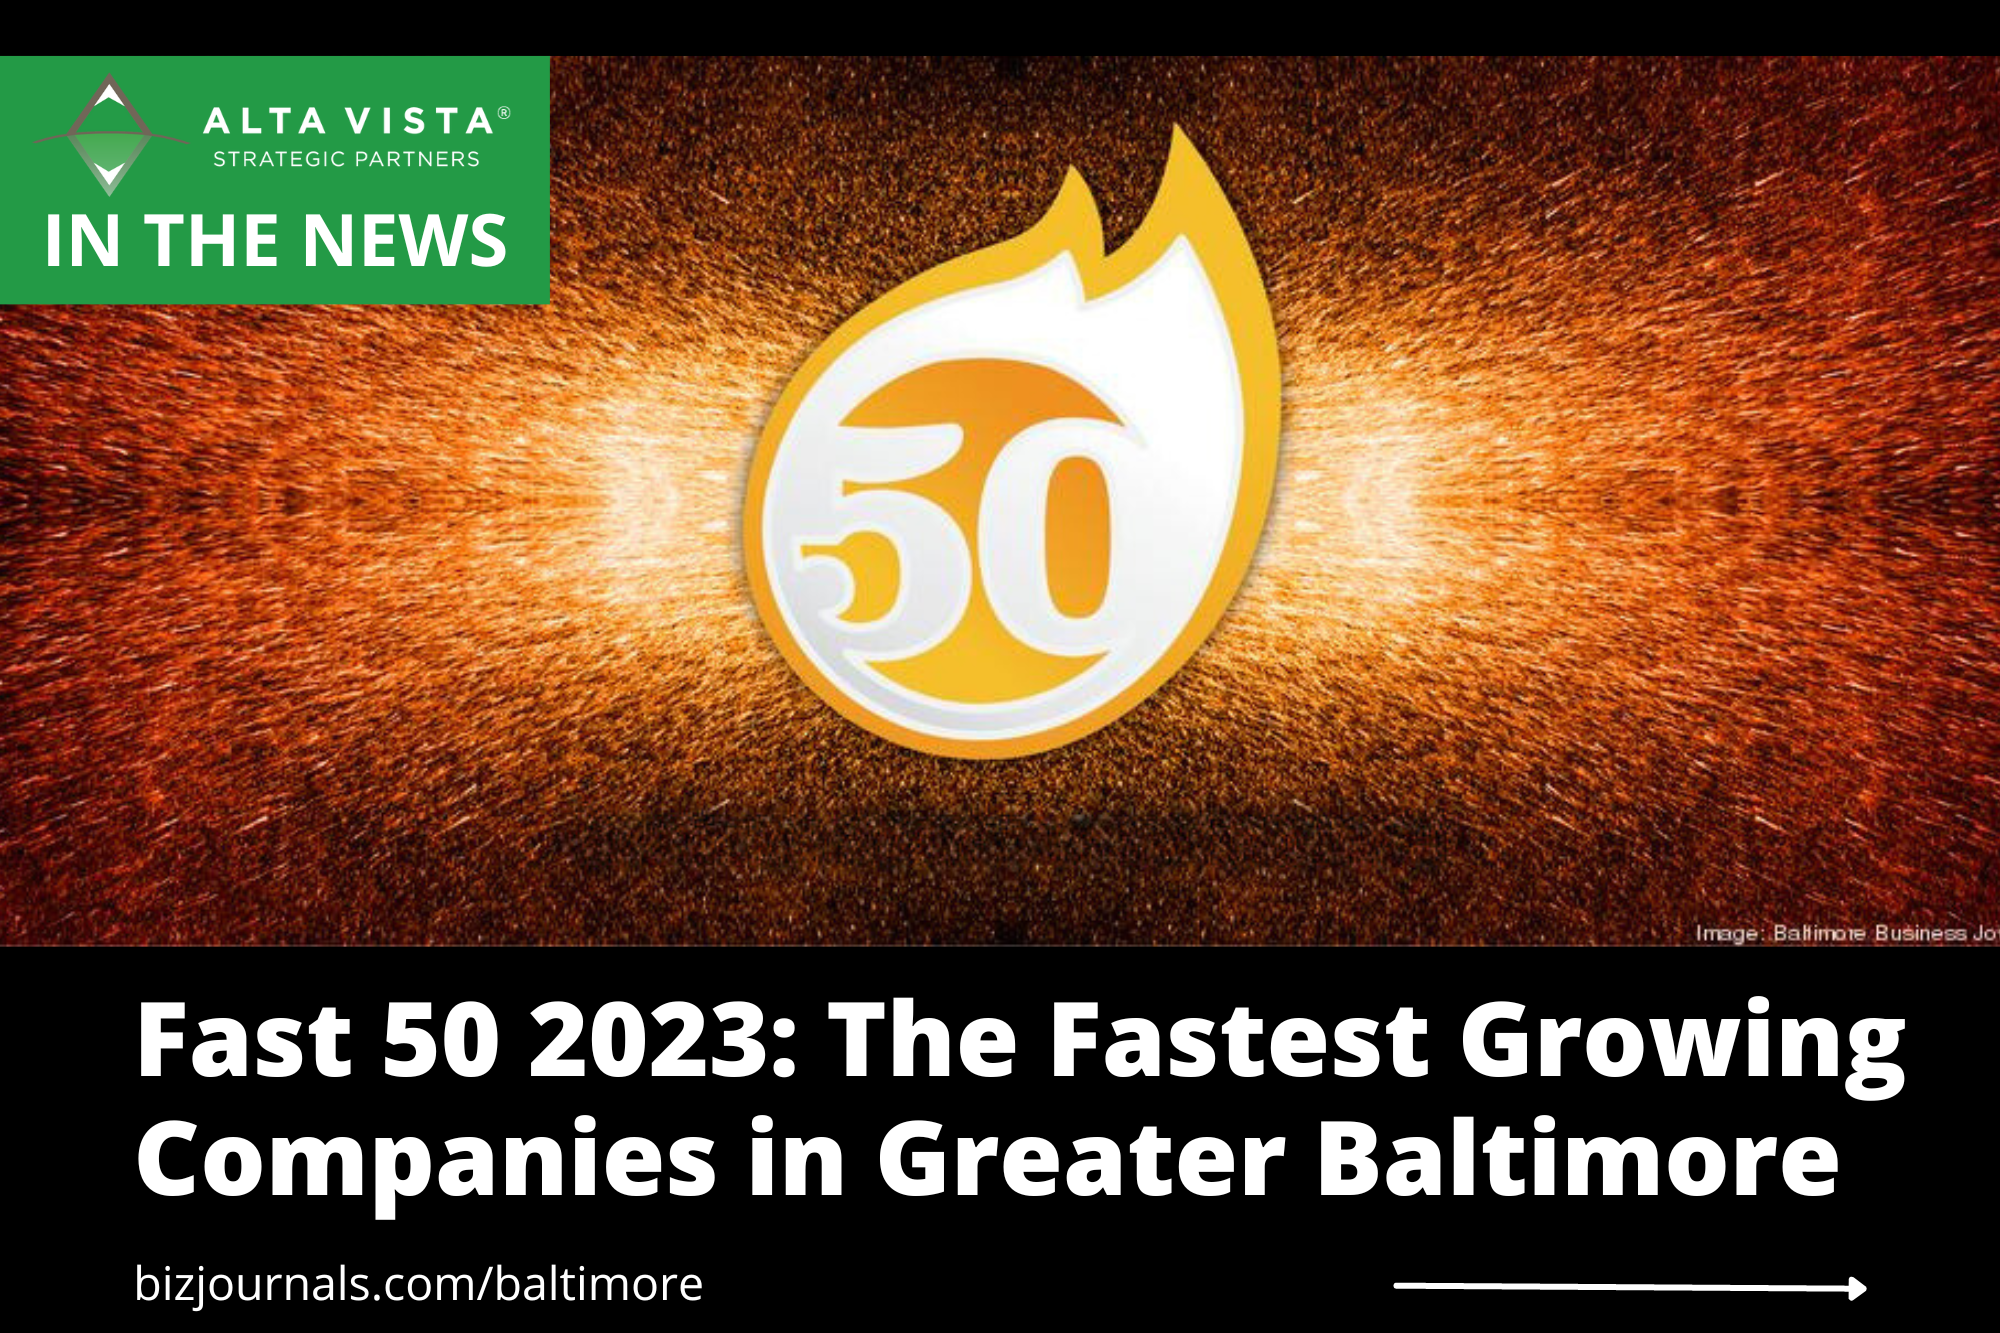 AltaVista Strategic Partners Earns Coveted Spot on Baltimore Business Journal’s Fast 50 List for the Third Time